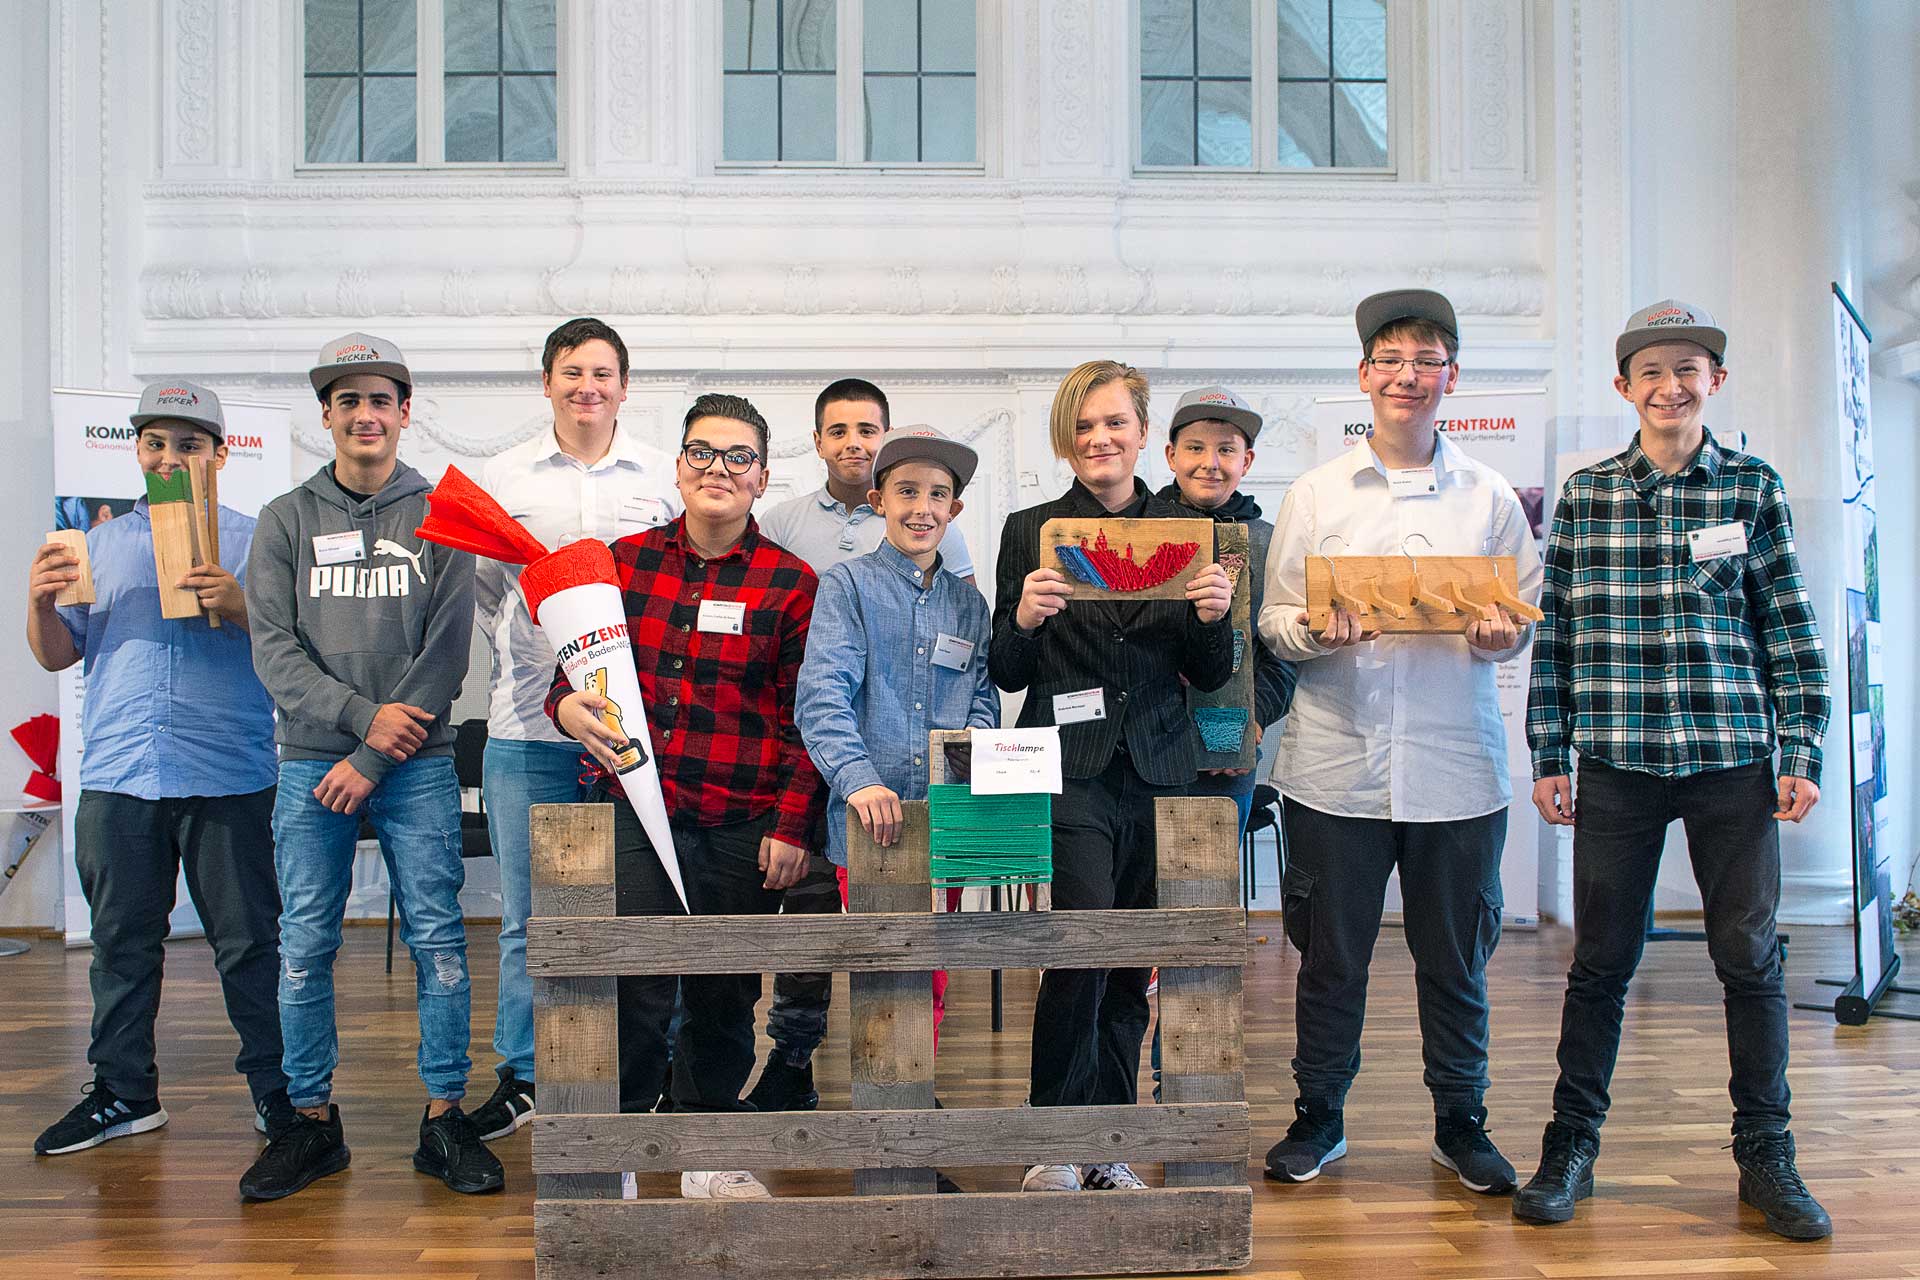 WÜRTH EDUCATION PRIZE  The young people from the student company “Woodpecker ... alles paletti!,” set up by Schule am Steinhaus in Besigheim, at the project launch in October 2019. During the competition, they demonstrated entrepreneurial spirit and had the opportunity to learn about the business world.